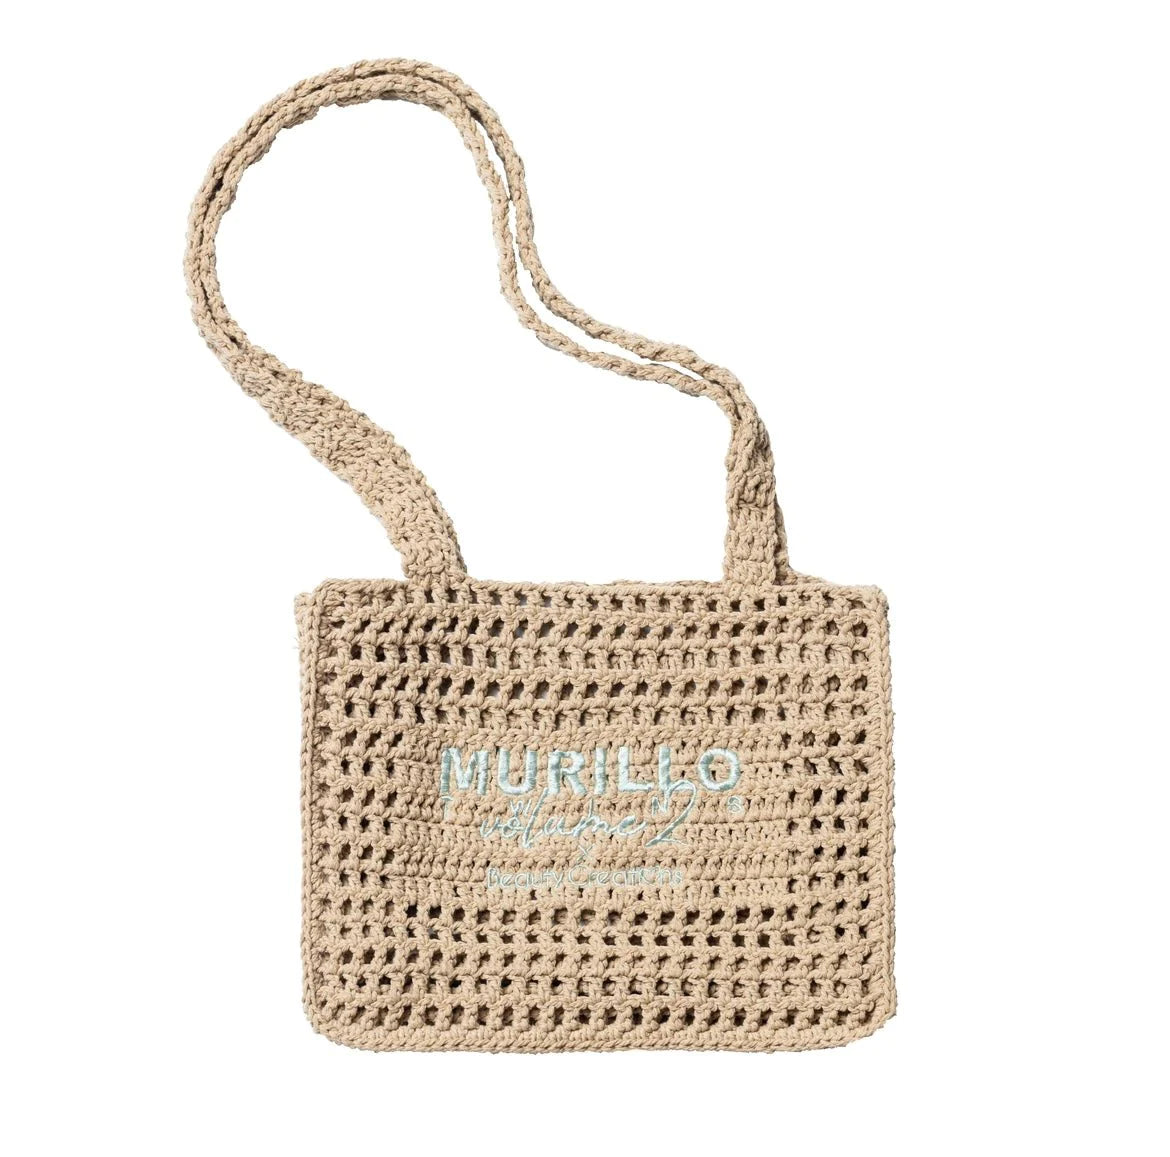 BEAUTY CREATIONS - MURILLO TWINS VOL. 2 - WOVEN TOTE BAG